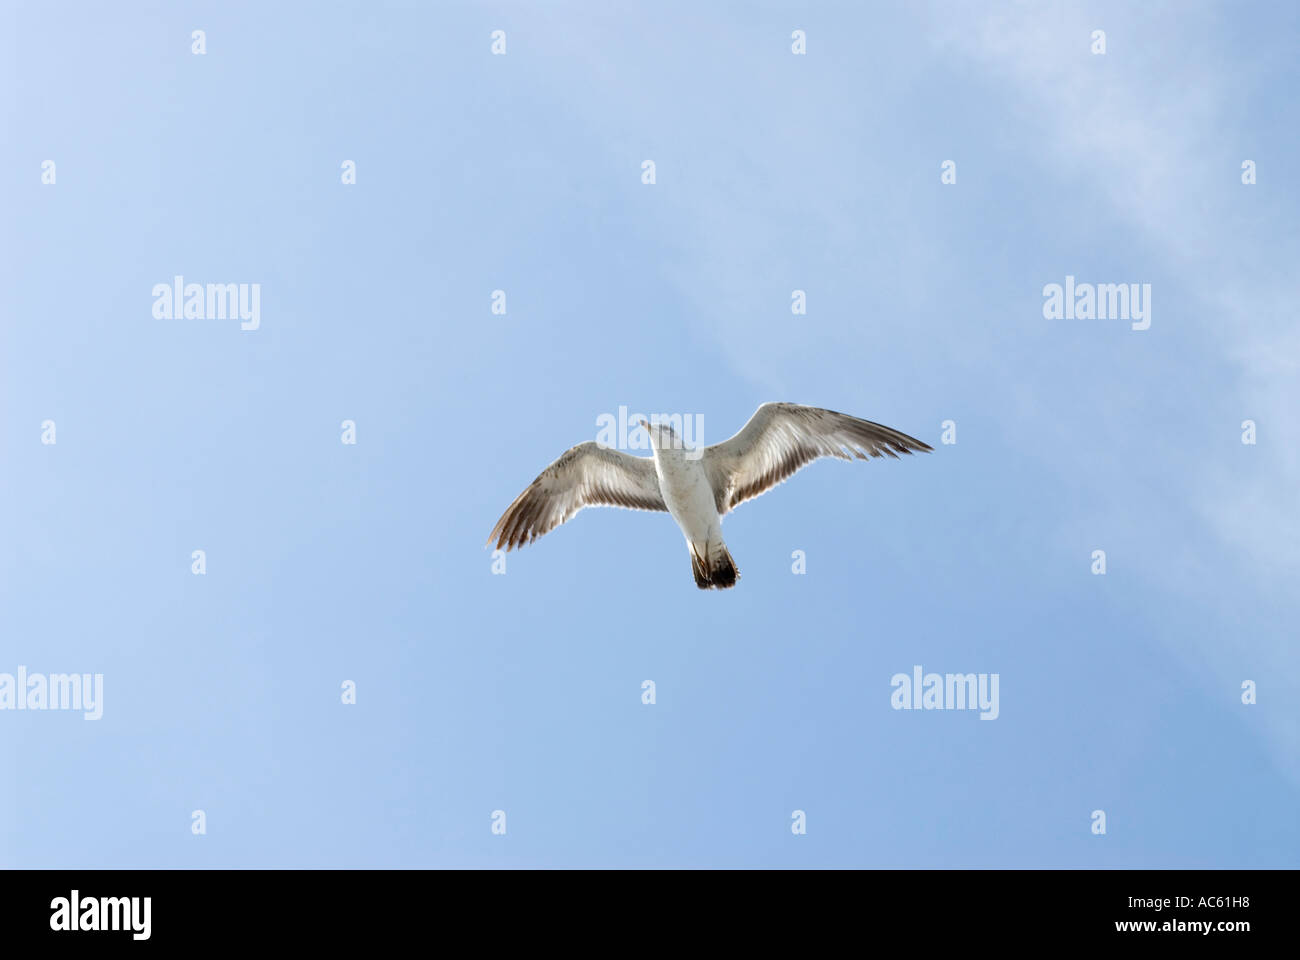 Seagull flying Stock Photo